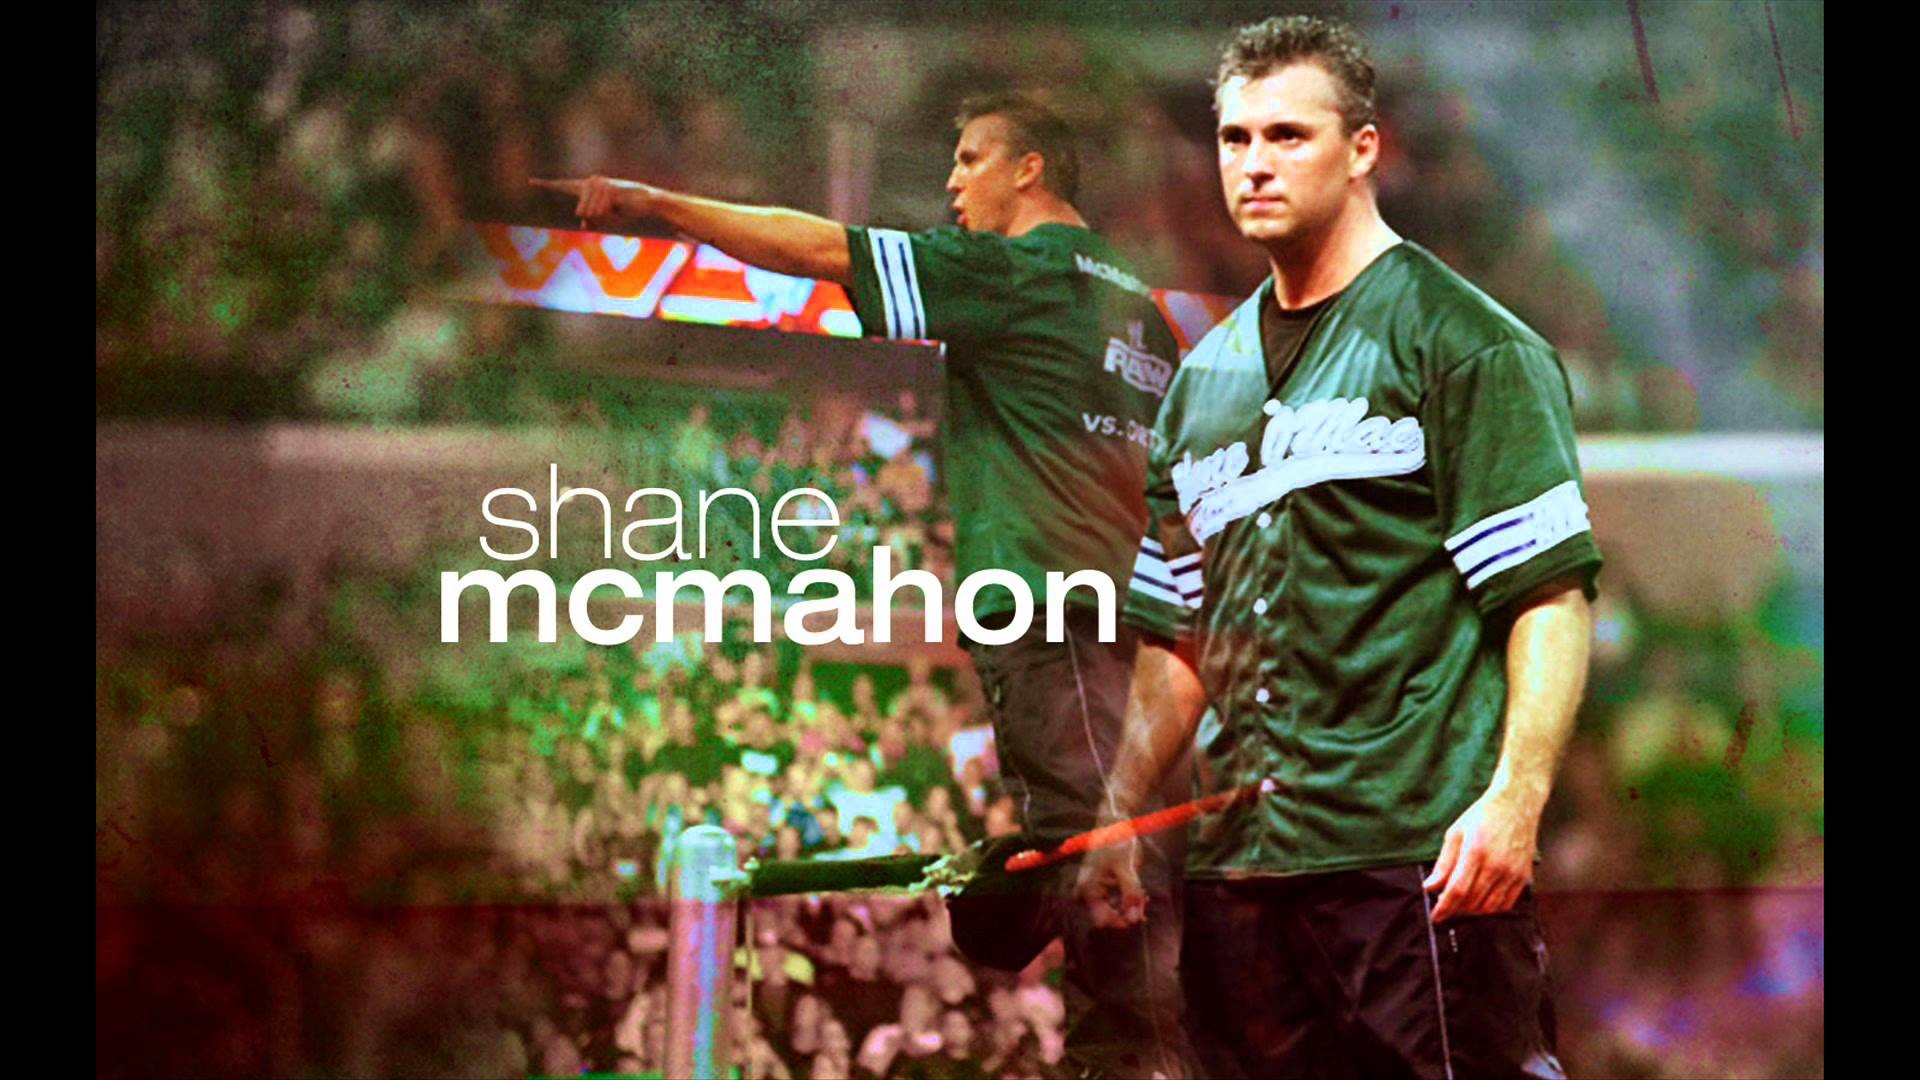 1920x1080 Shane McMahon 8th Theme Song - Here Comes The Money /w Download Link -  YouTube